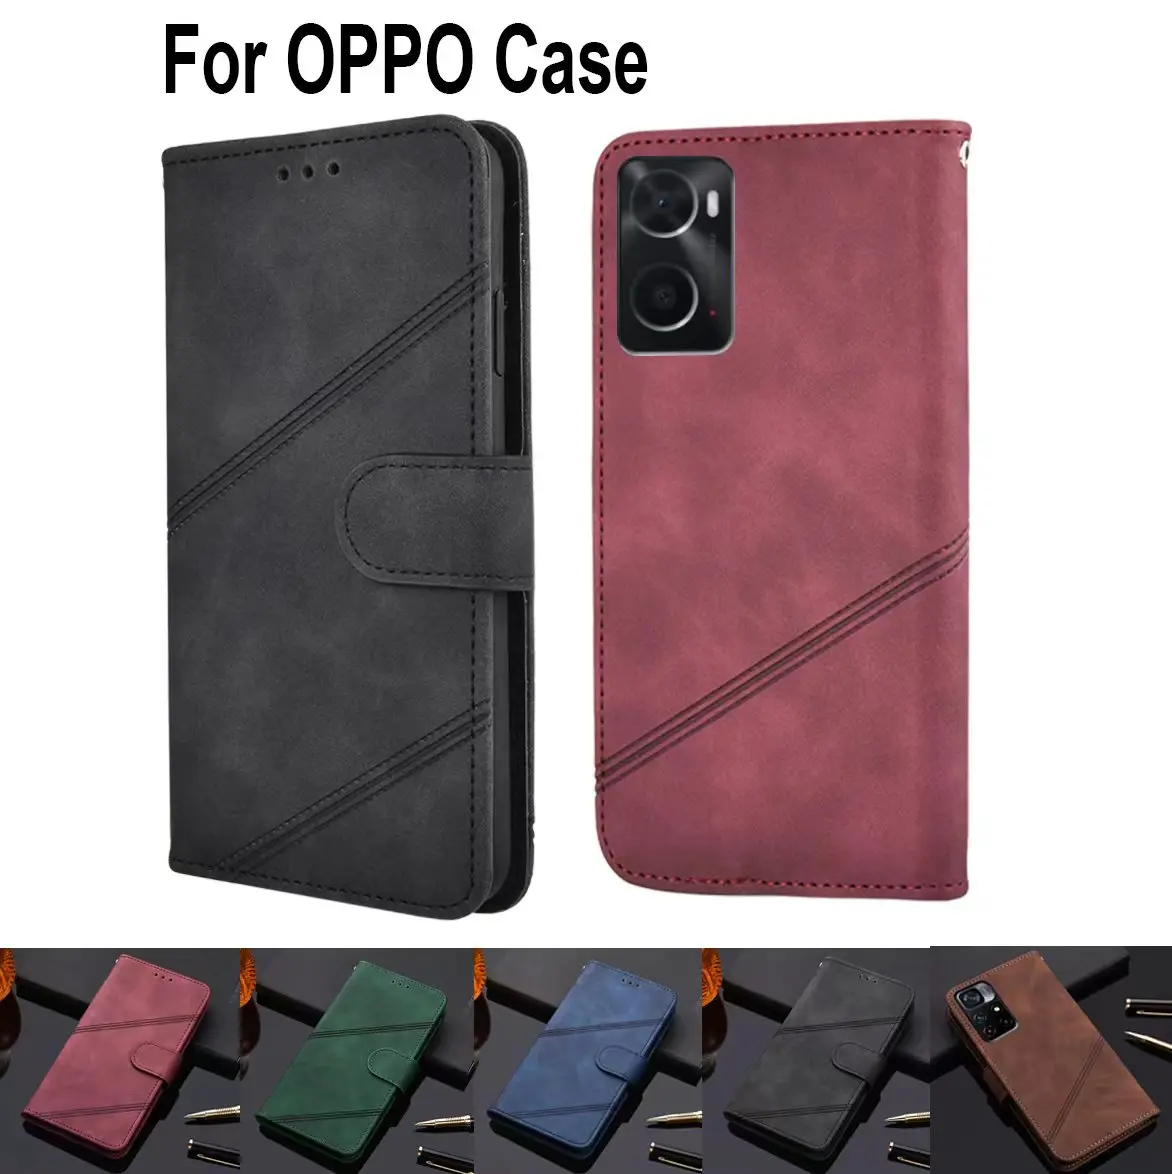 

Leather Phone Case For OPPO A83 A1 A7 2018 AX7 A5S AX5S A7N A12 K1 R15X RX17 Neo Find X F9 Pro A7X A5 A3S AX5 A3 F7 A9 Cover